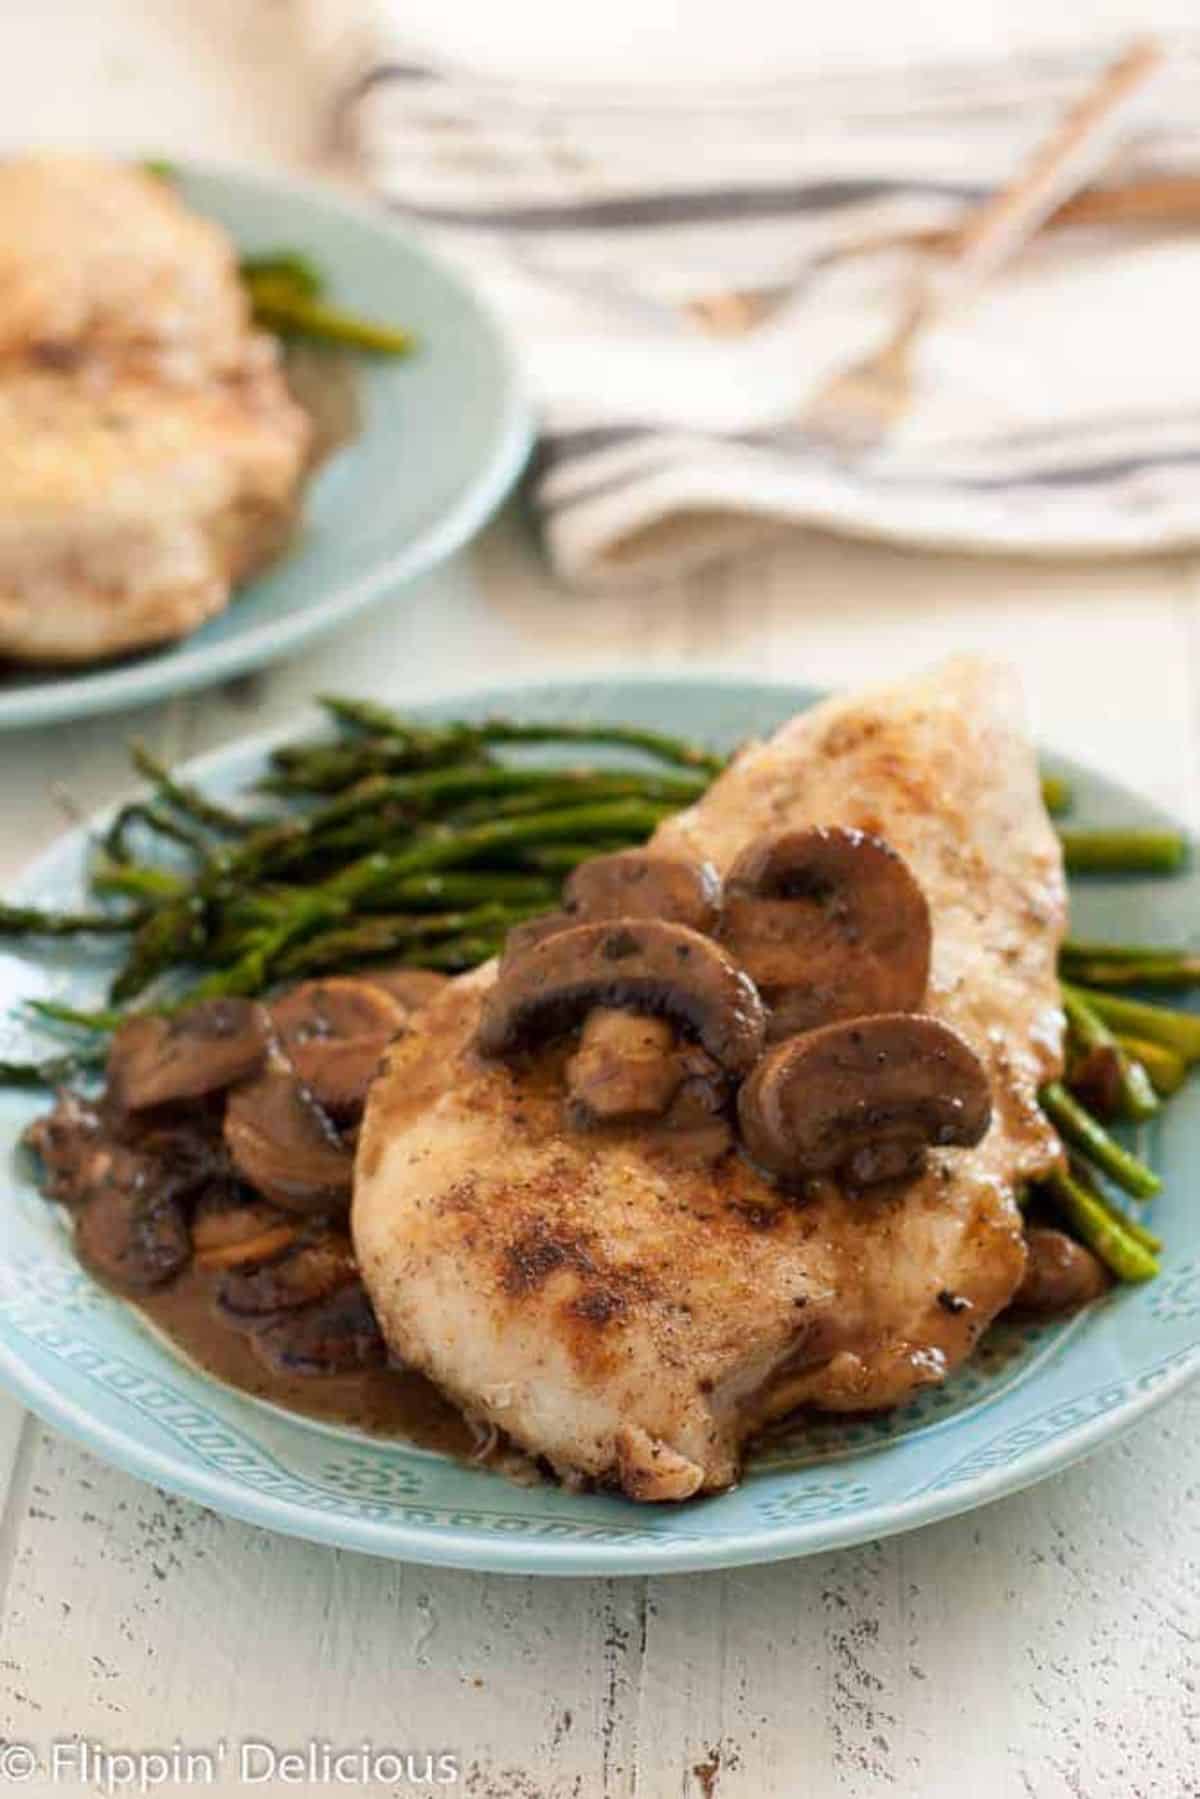 Tasty Gluten-Free Chicken Marsala with Mushrooms with asparagus on a blue plate.